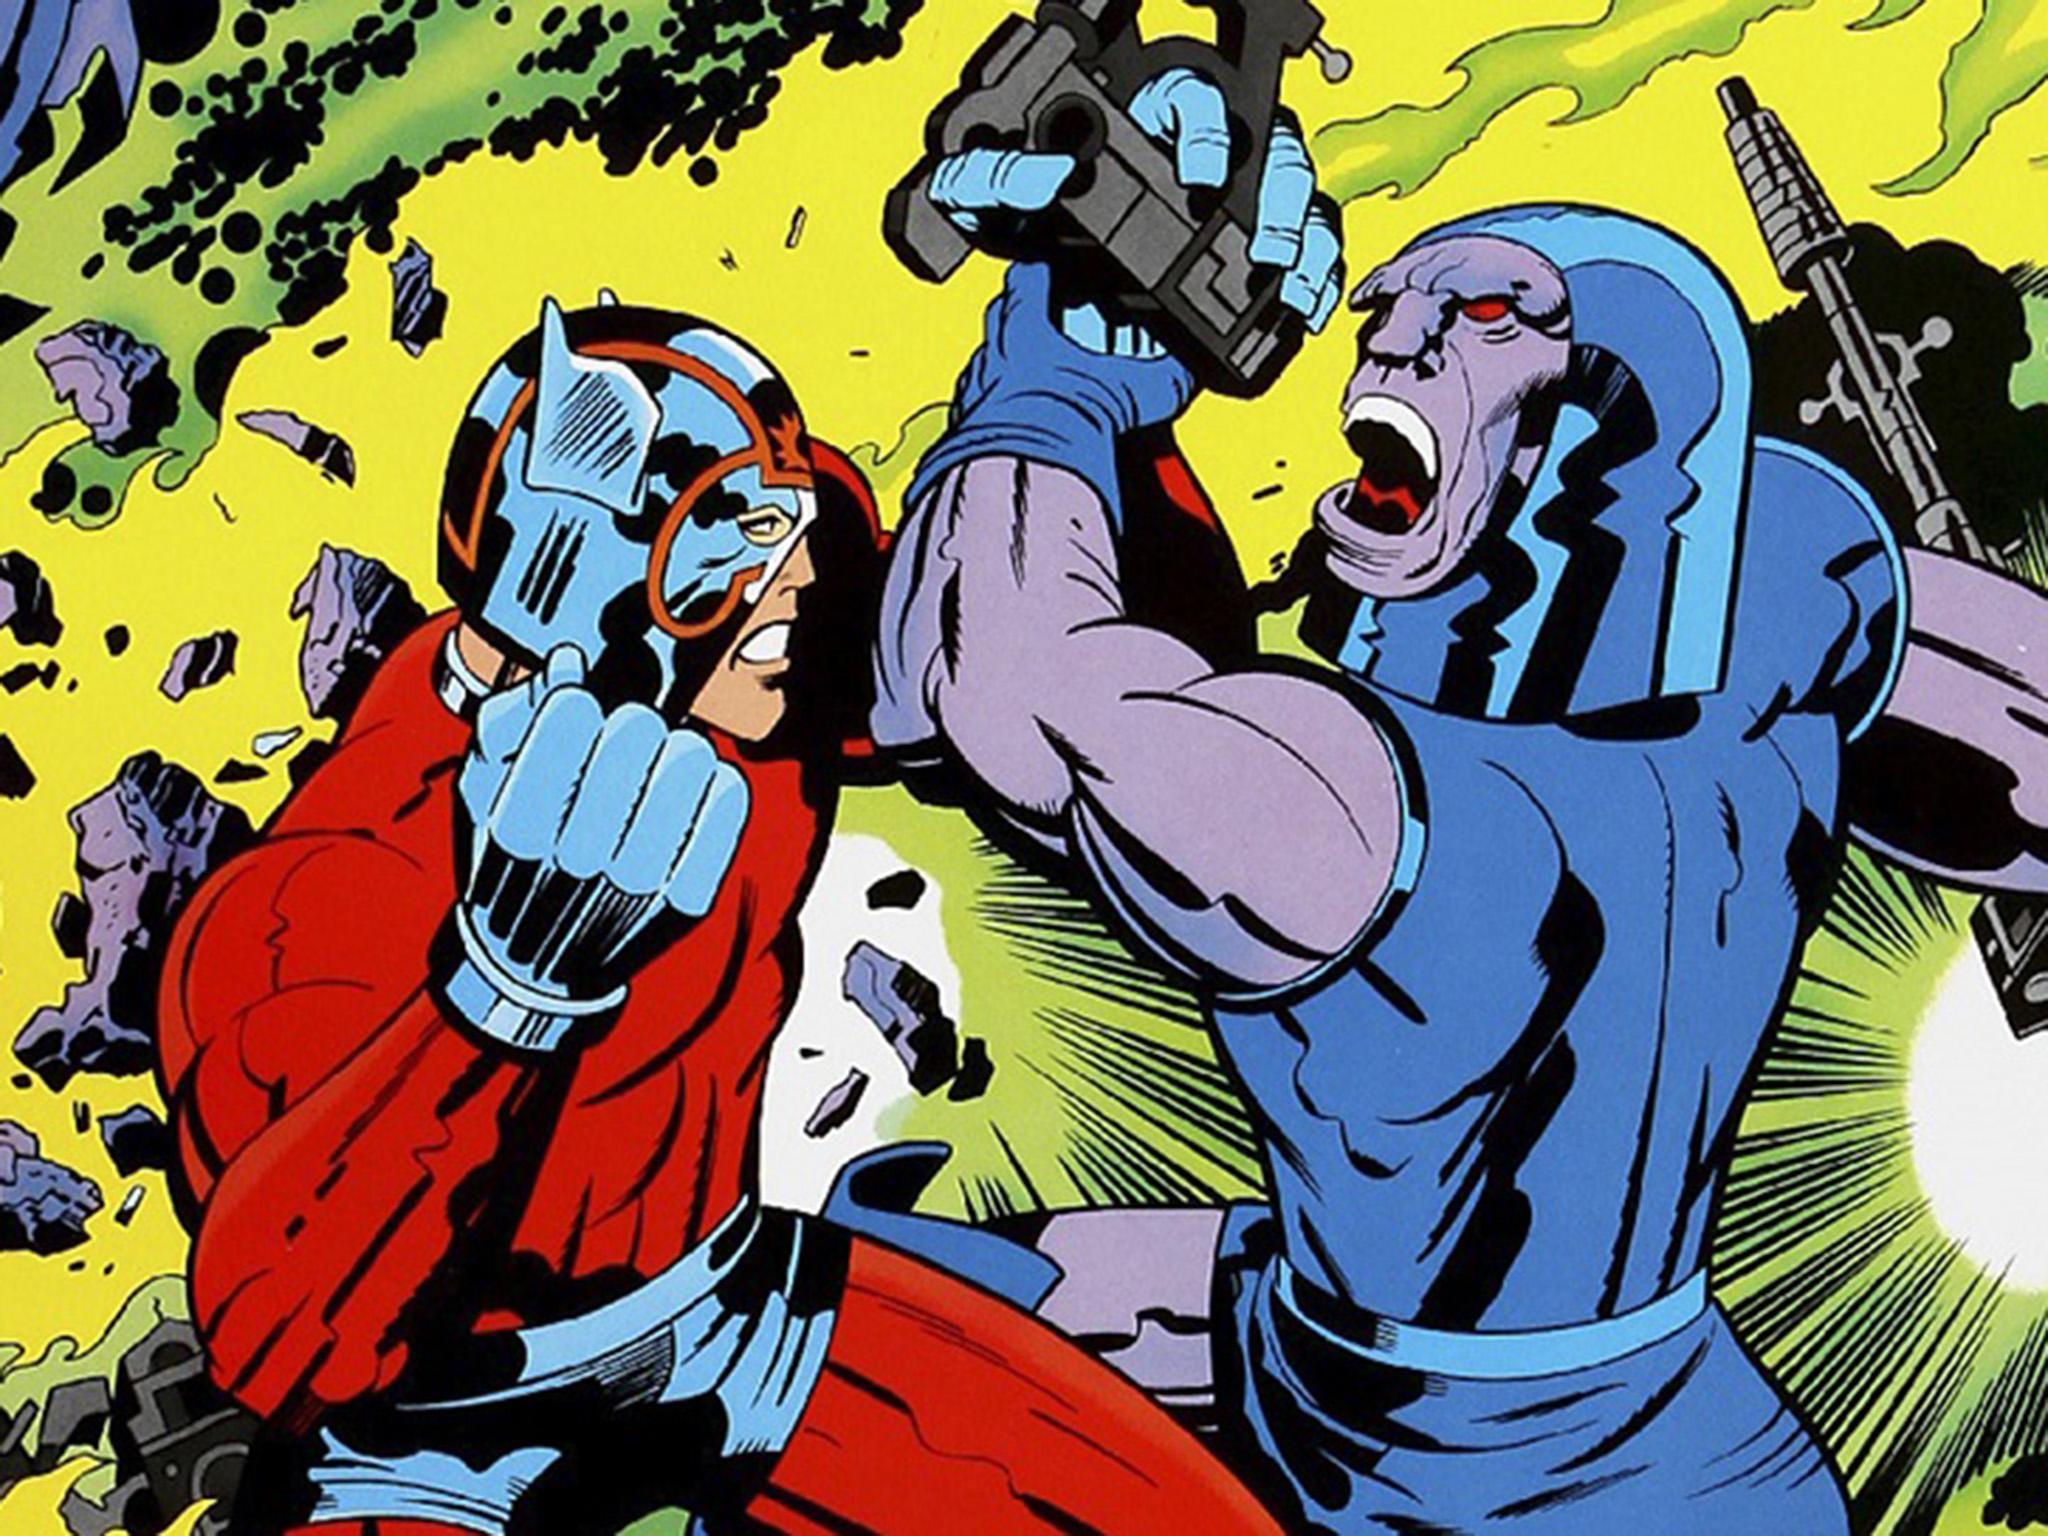 Orion of the New Gods (left) battles his deadly enemy Darkseid